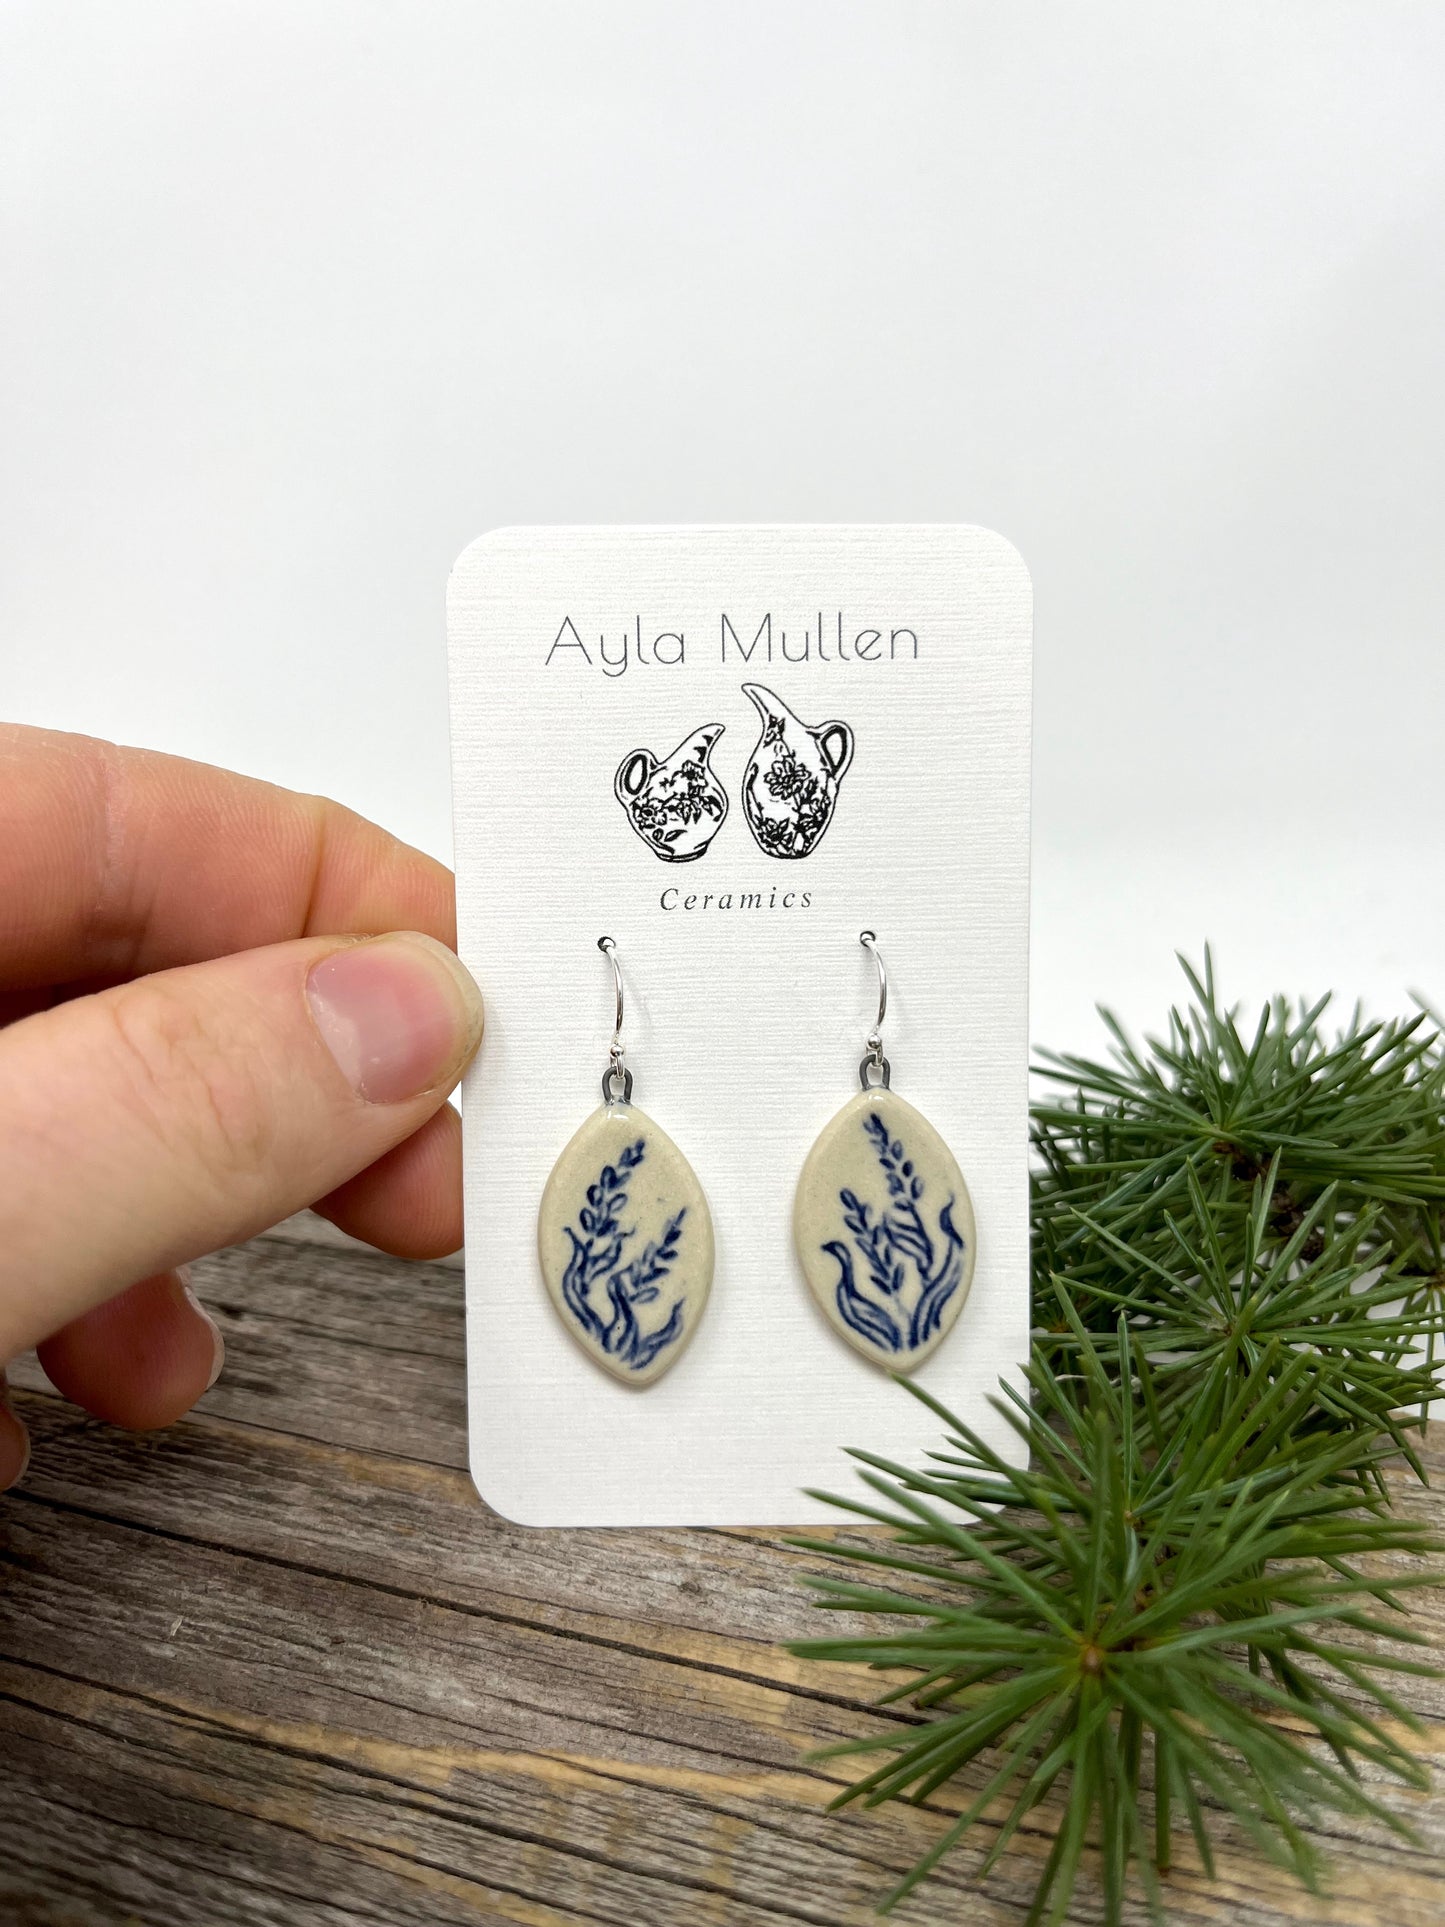 Small Wild Grass Earrings in Cobalt Blue, Sterling Silver